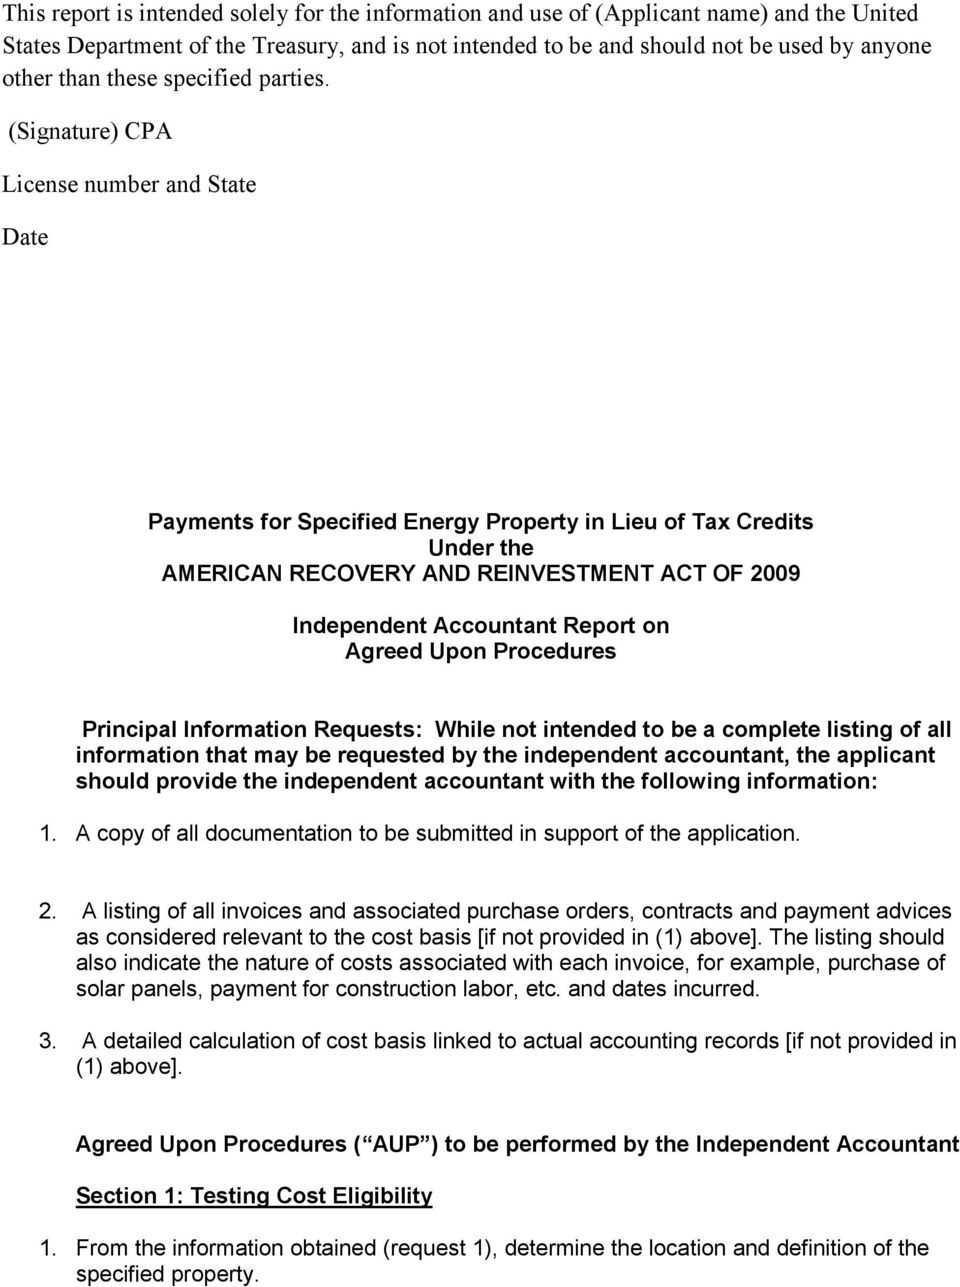 Payments For Specified Energy Property In Lieu Of Tax Within Agreed Upon Procedures Report Template